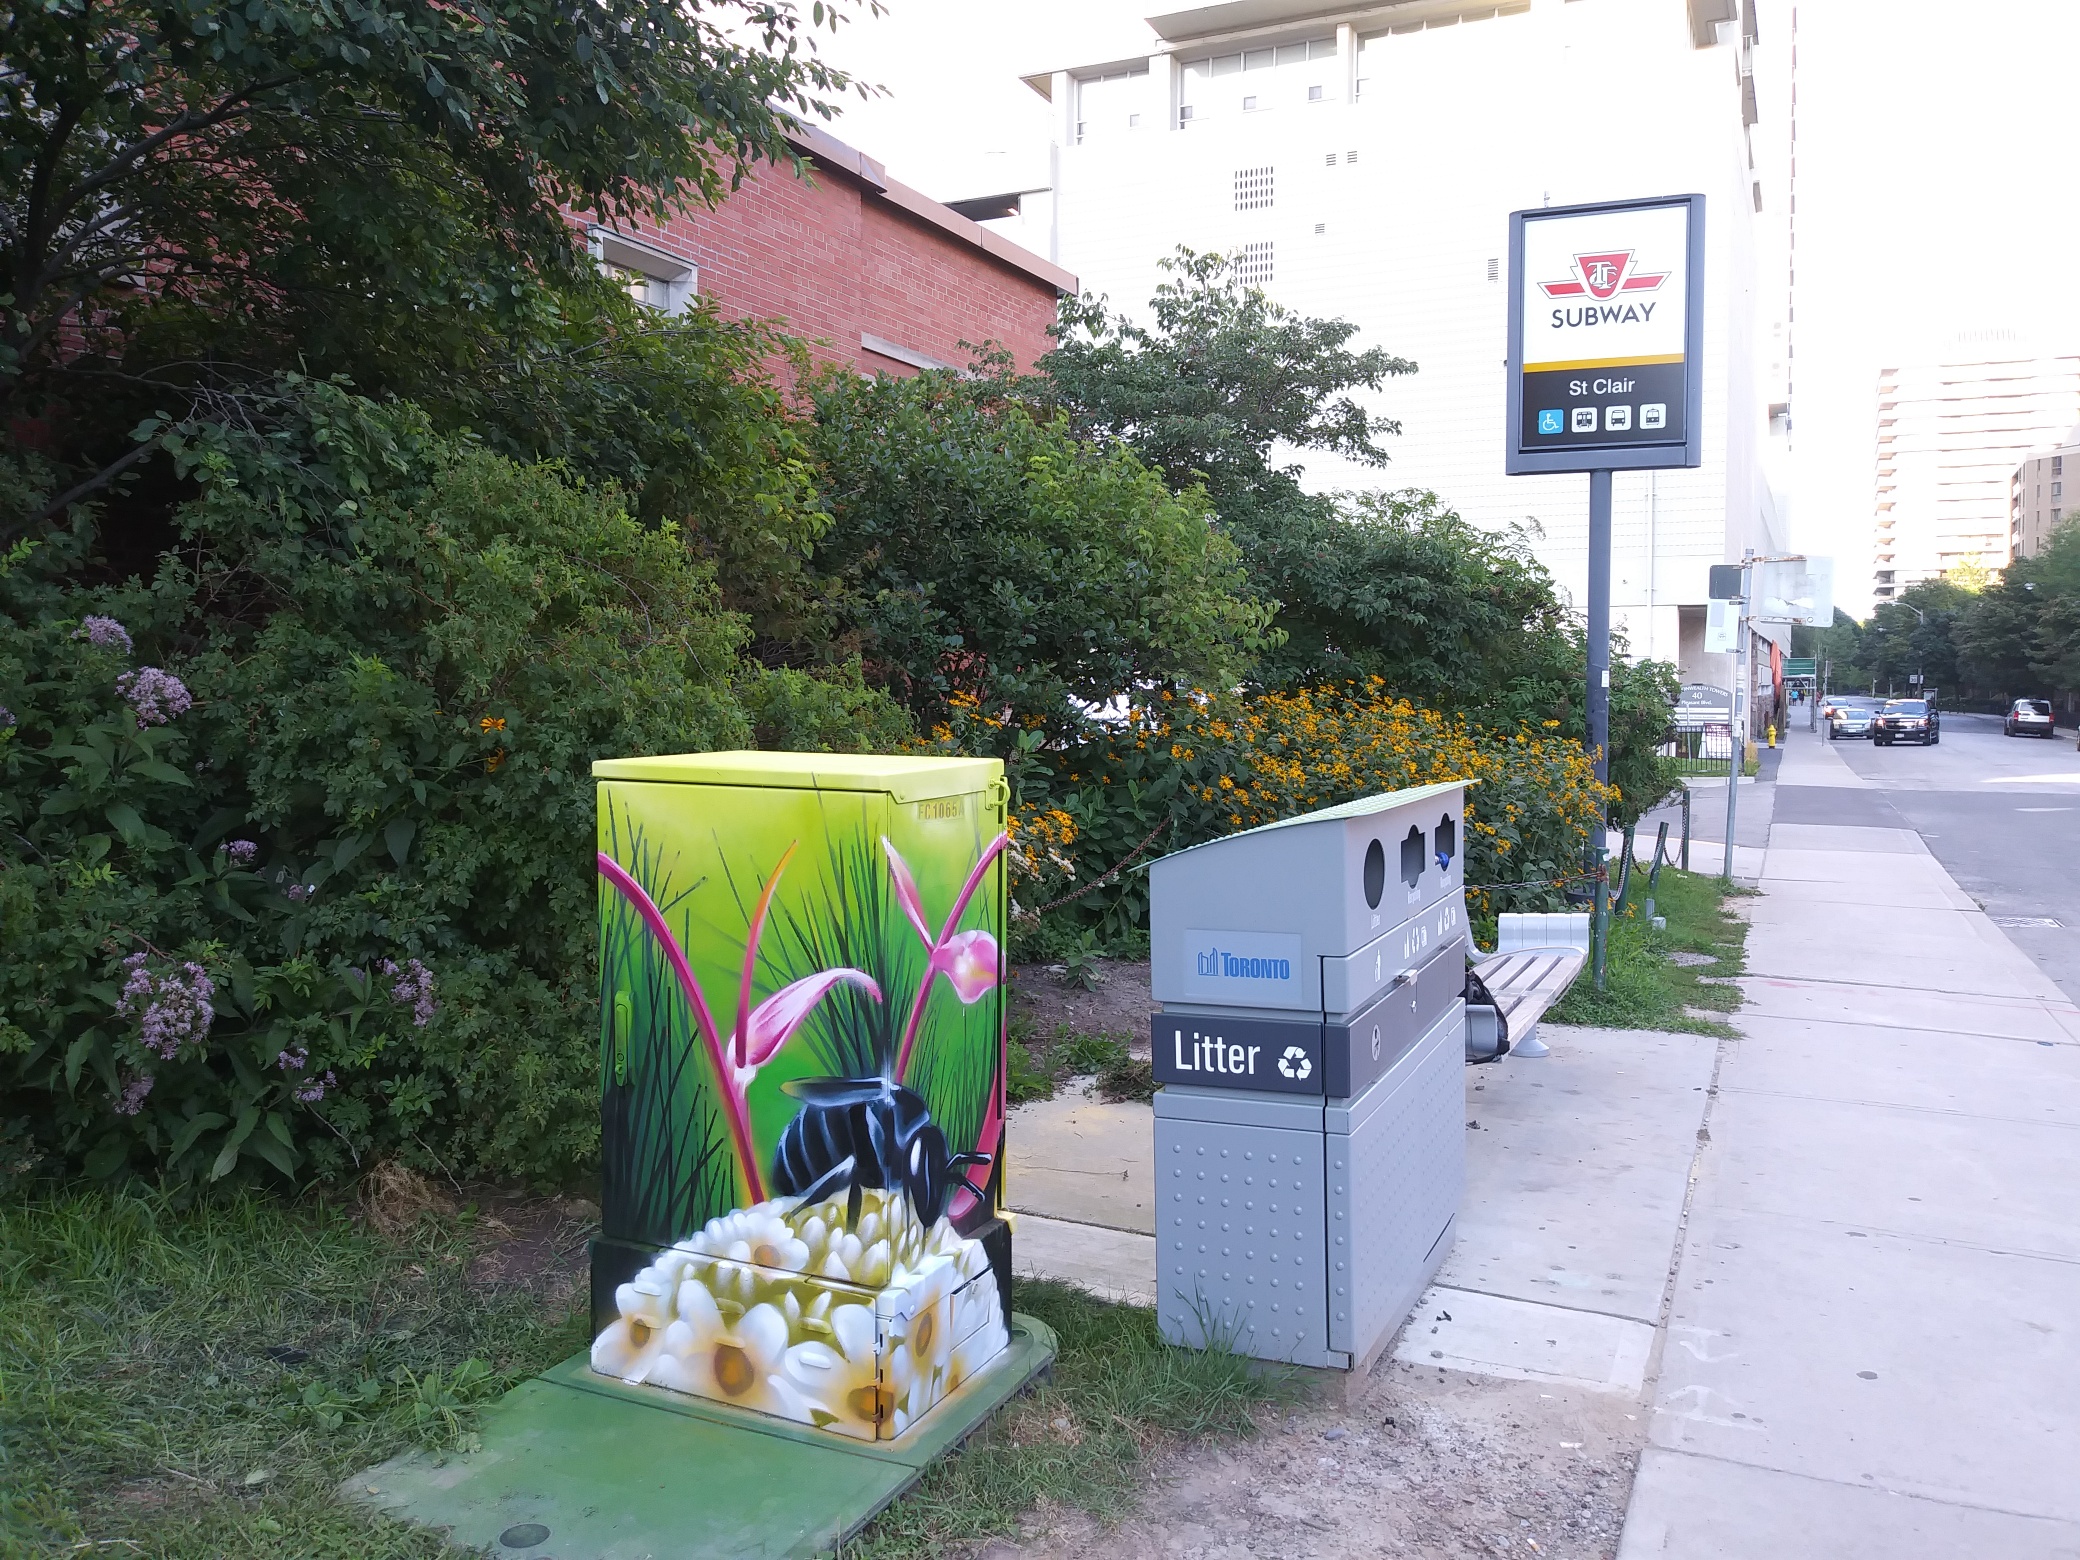 A mural on the Bell box near our St.Clair Garden highlighting local biodiversity and pollinator populations